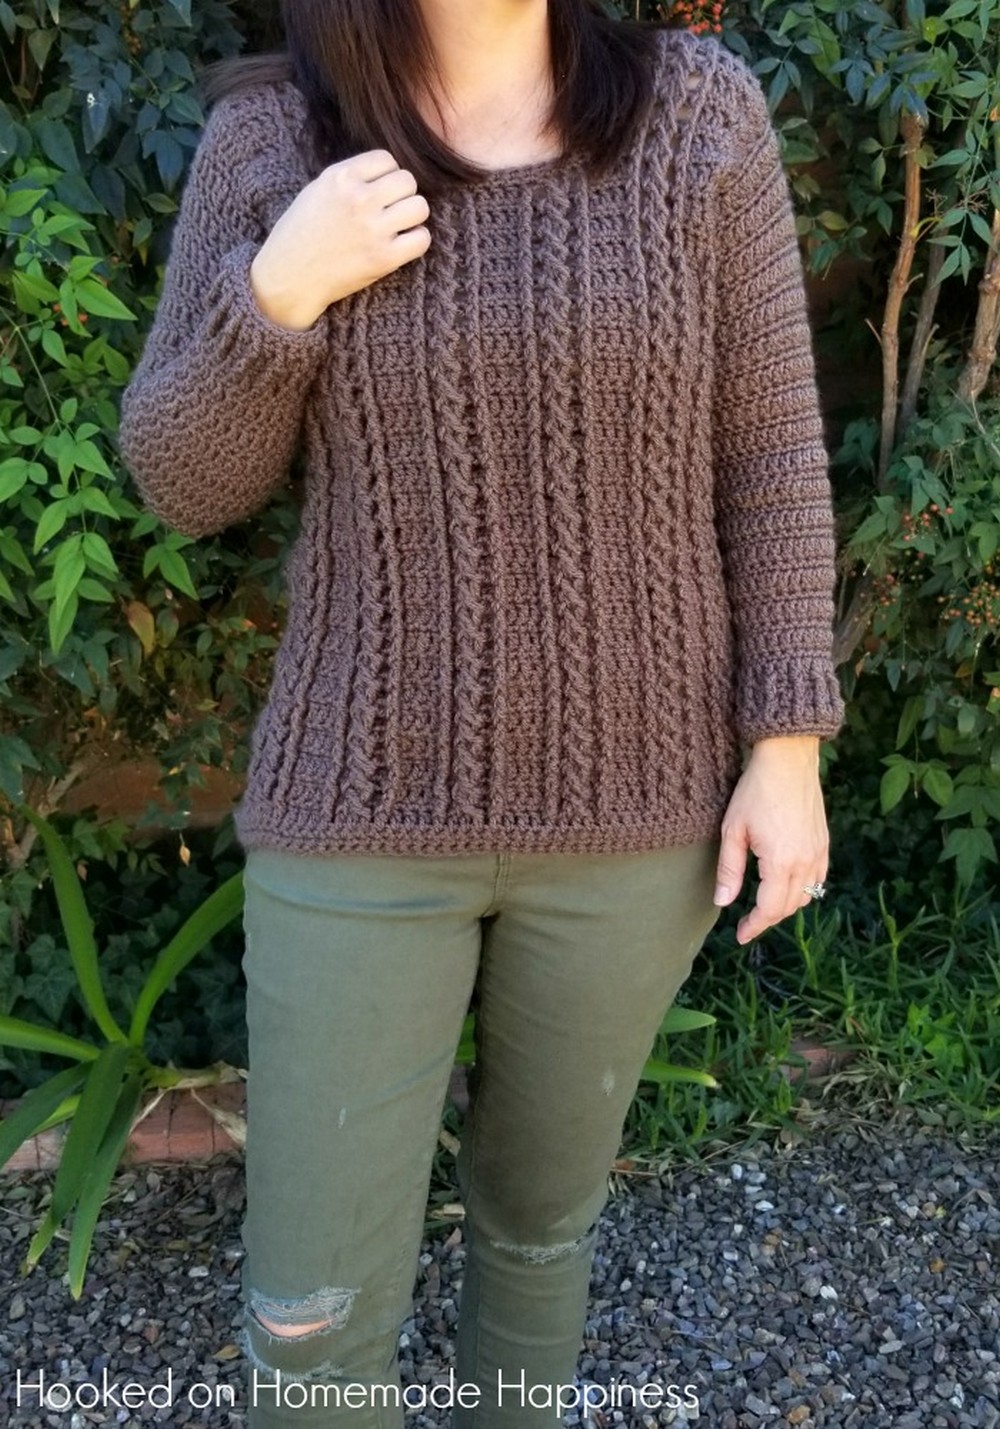 Cable pattern for a crochet sweater